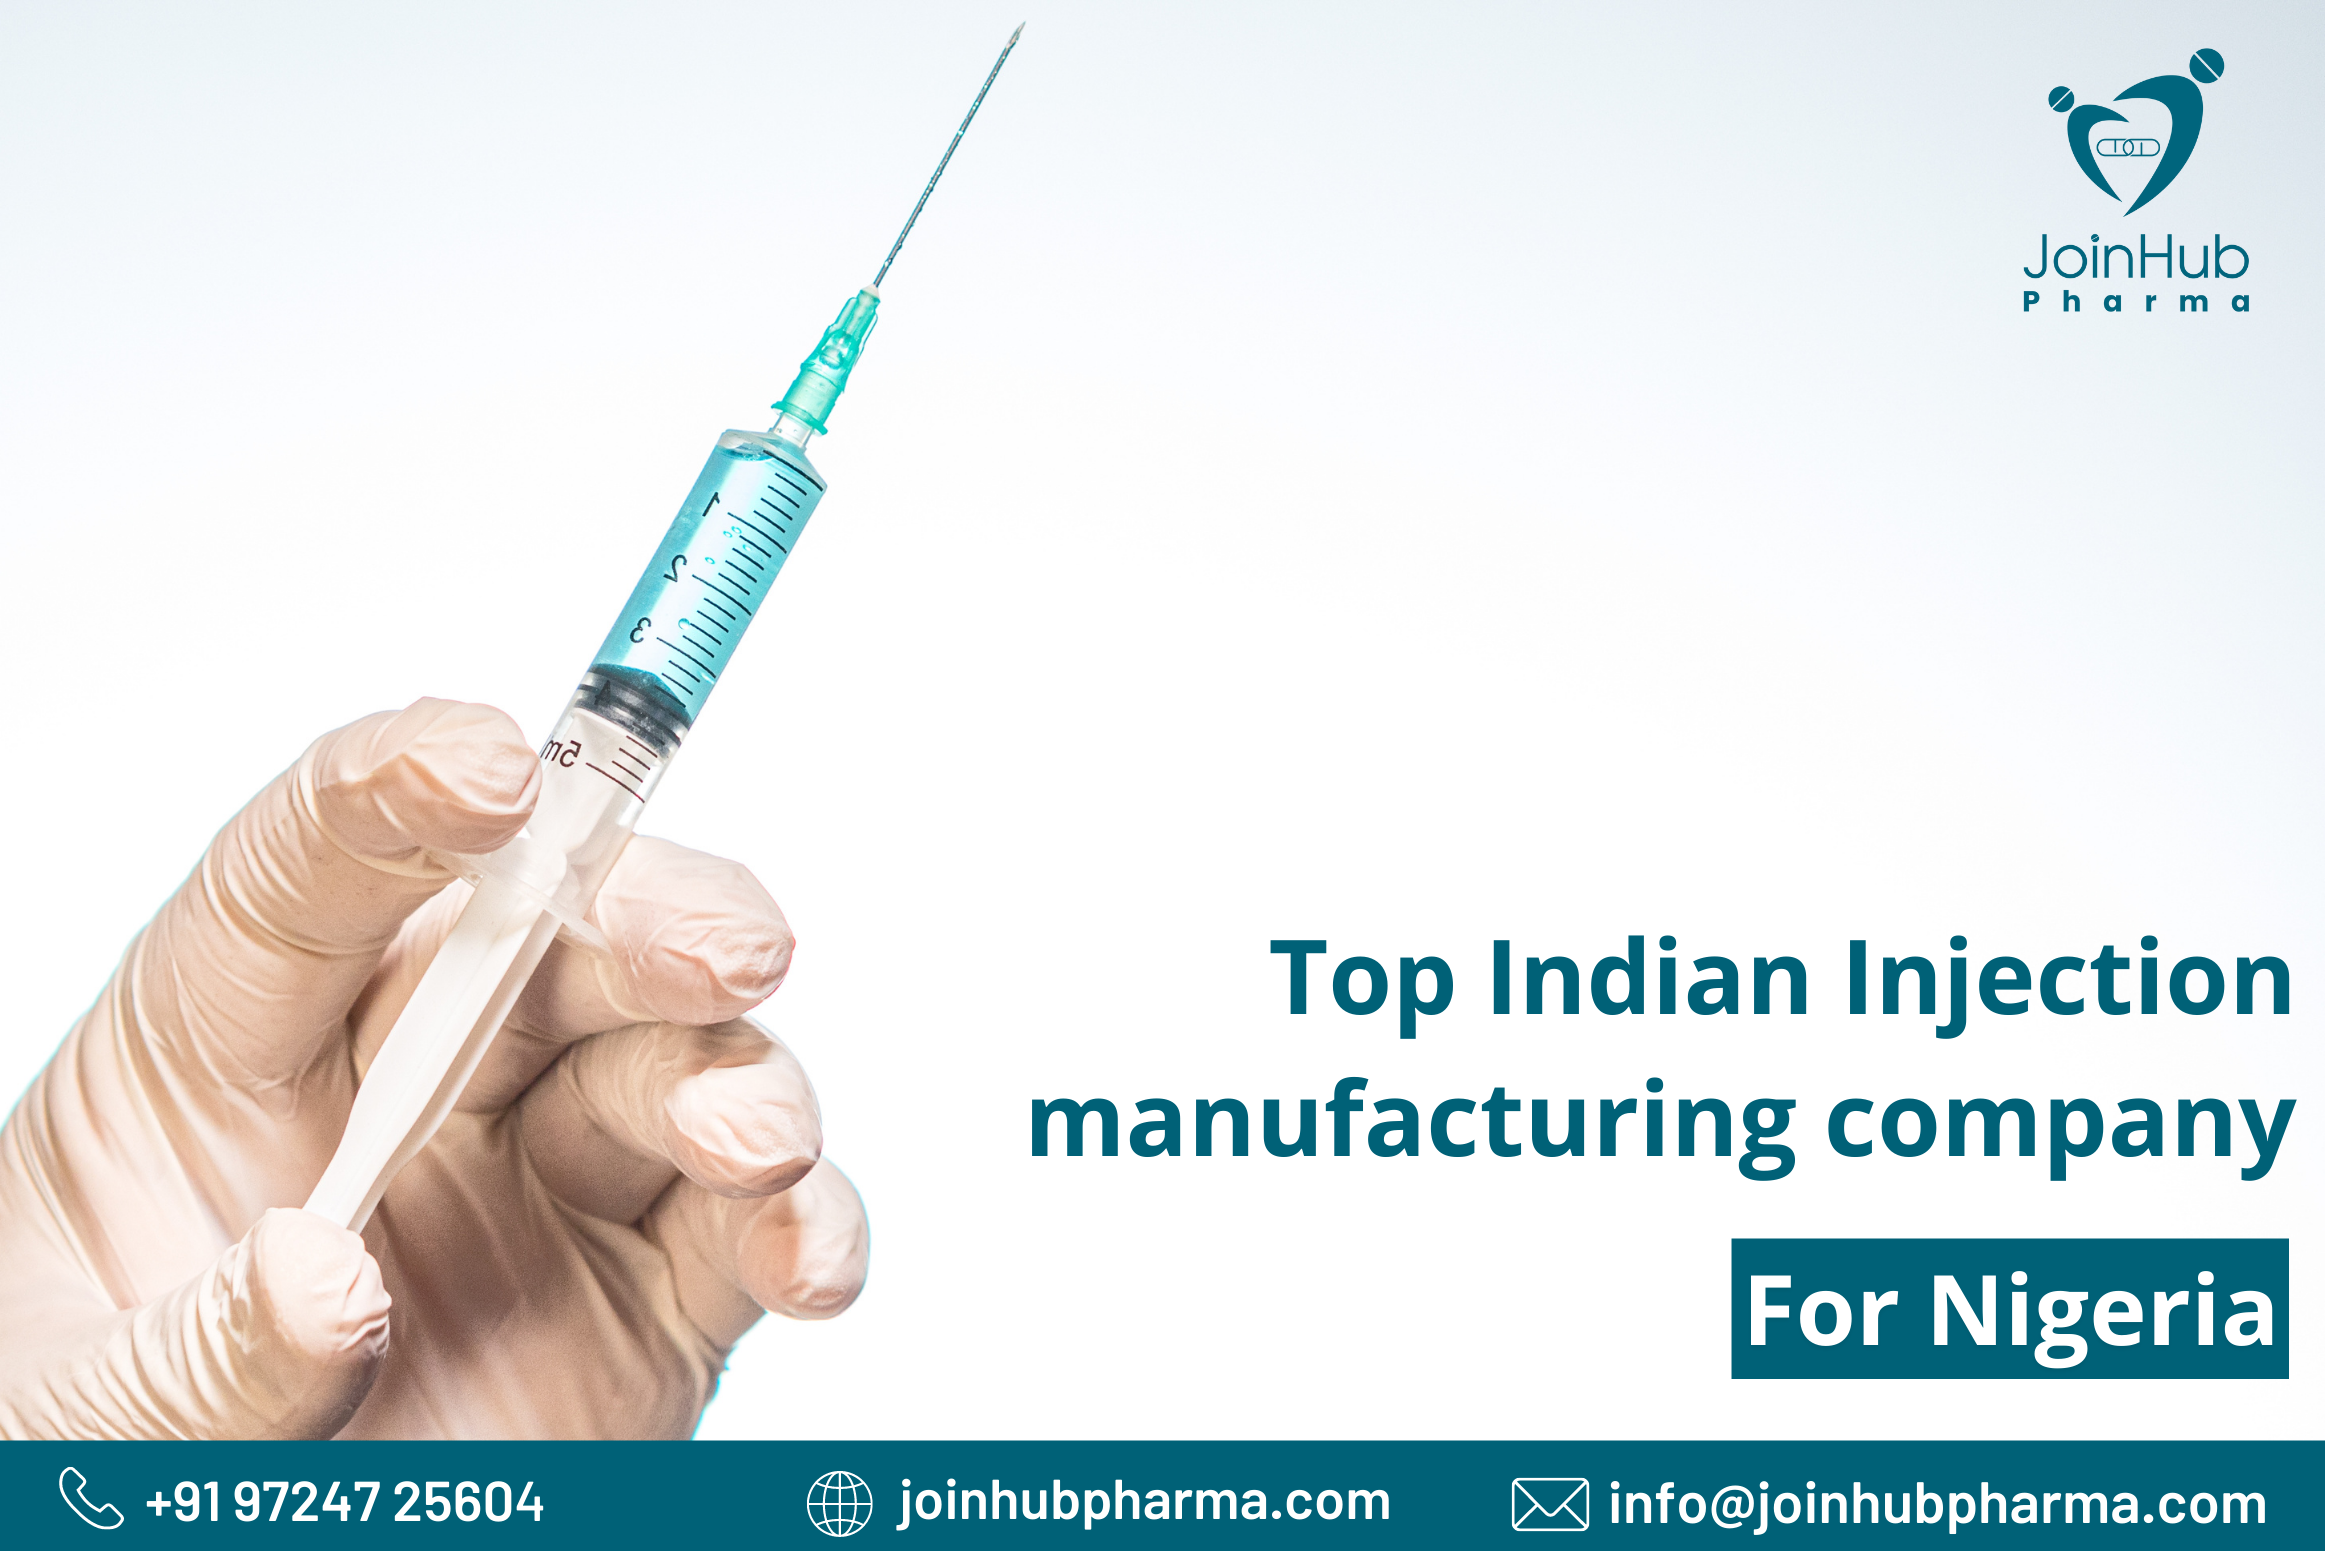 Top Indian Injection manufacturing company For Nigeria